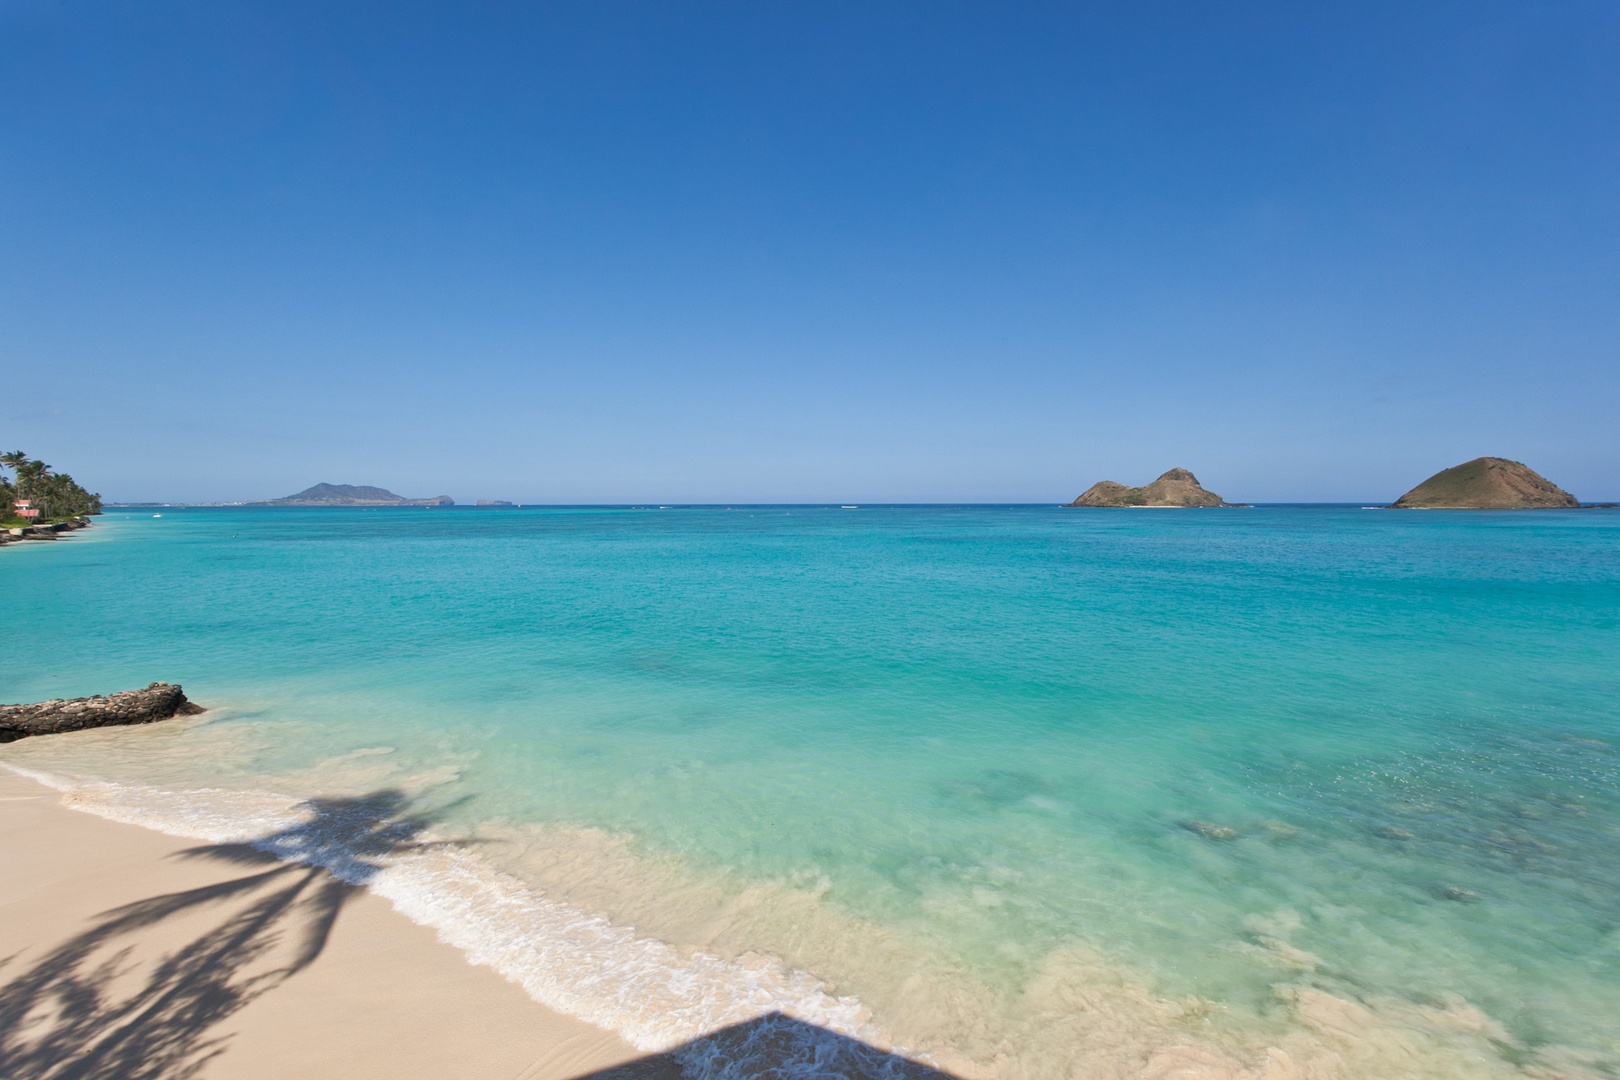 Kailua Vacation Rentals, Hale Mahina Lanikai* - The gentle waves provide the perfect soundtrack for relaxation.